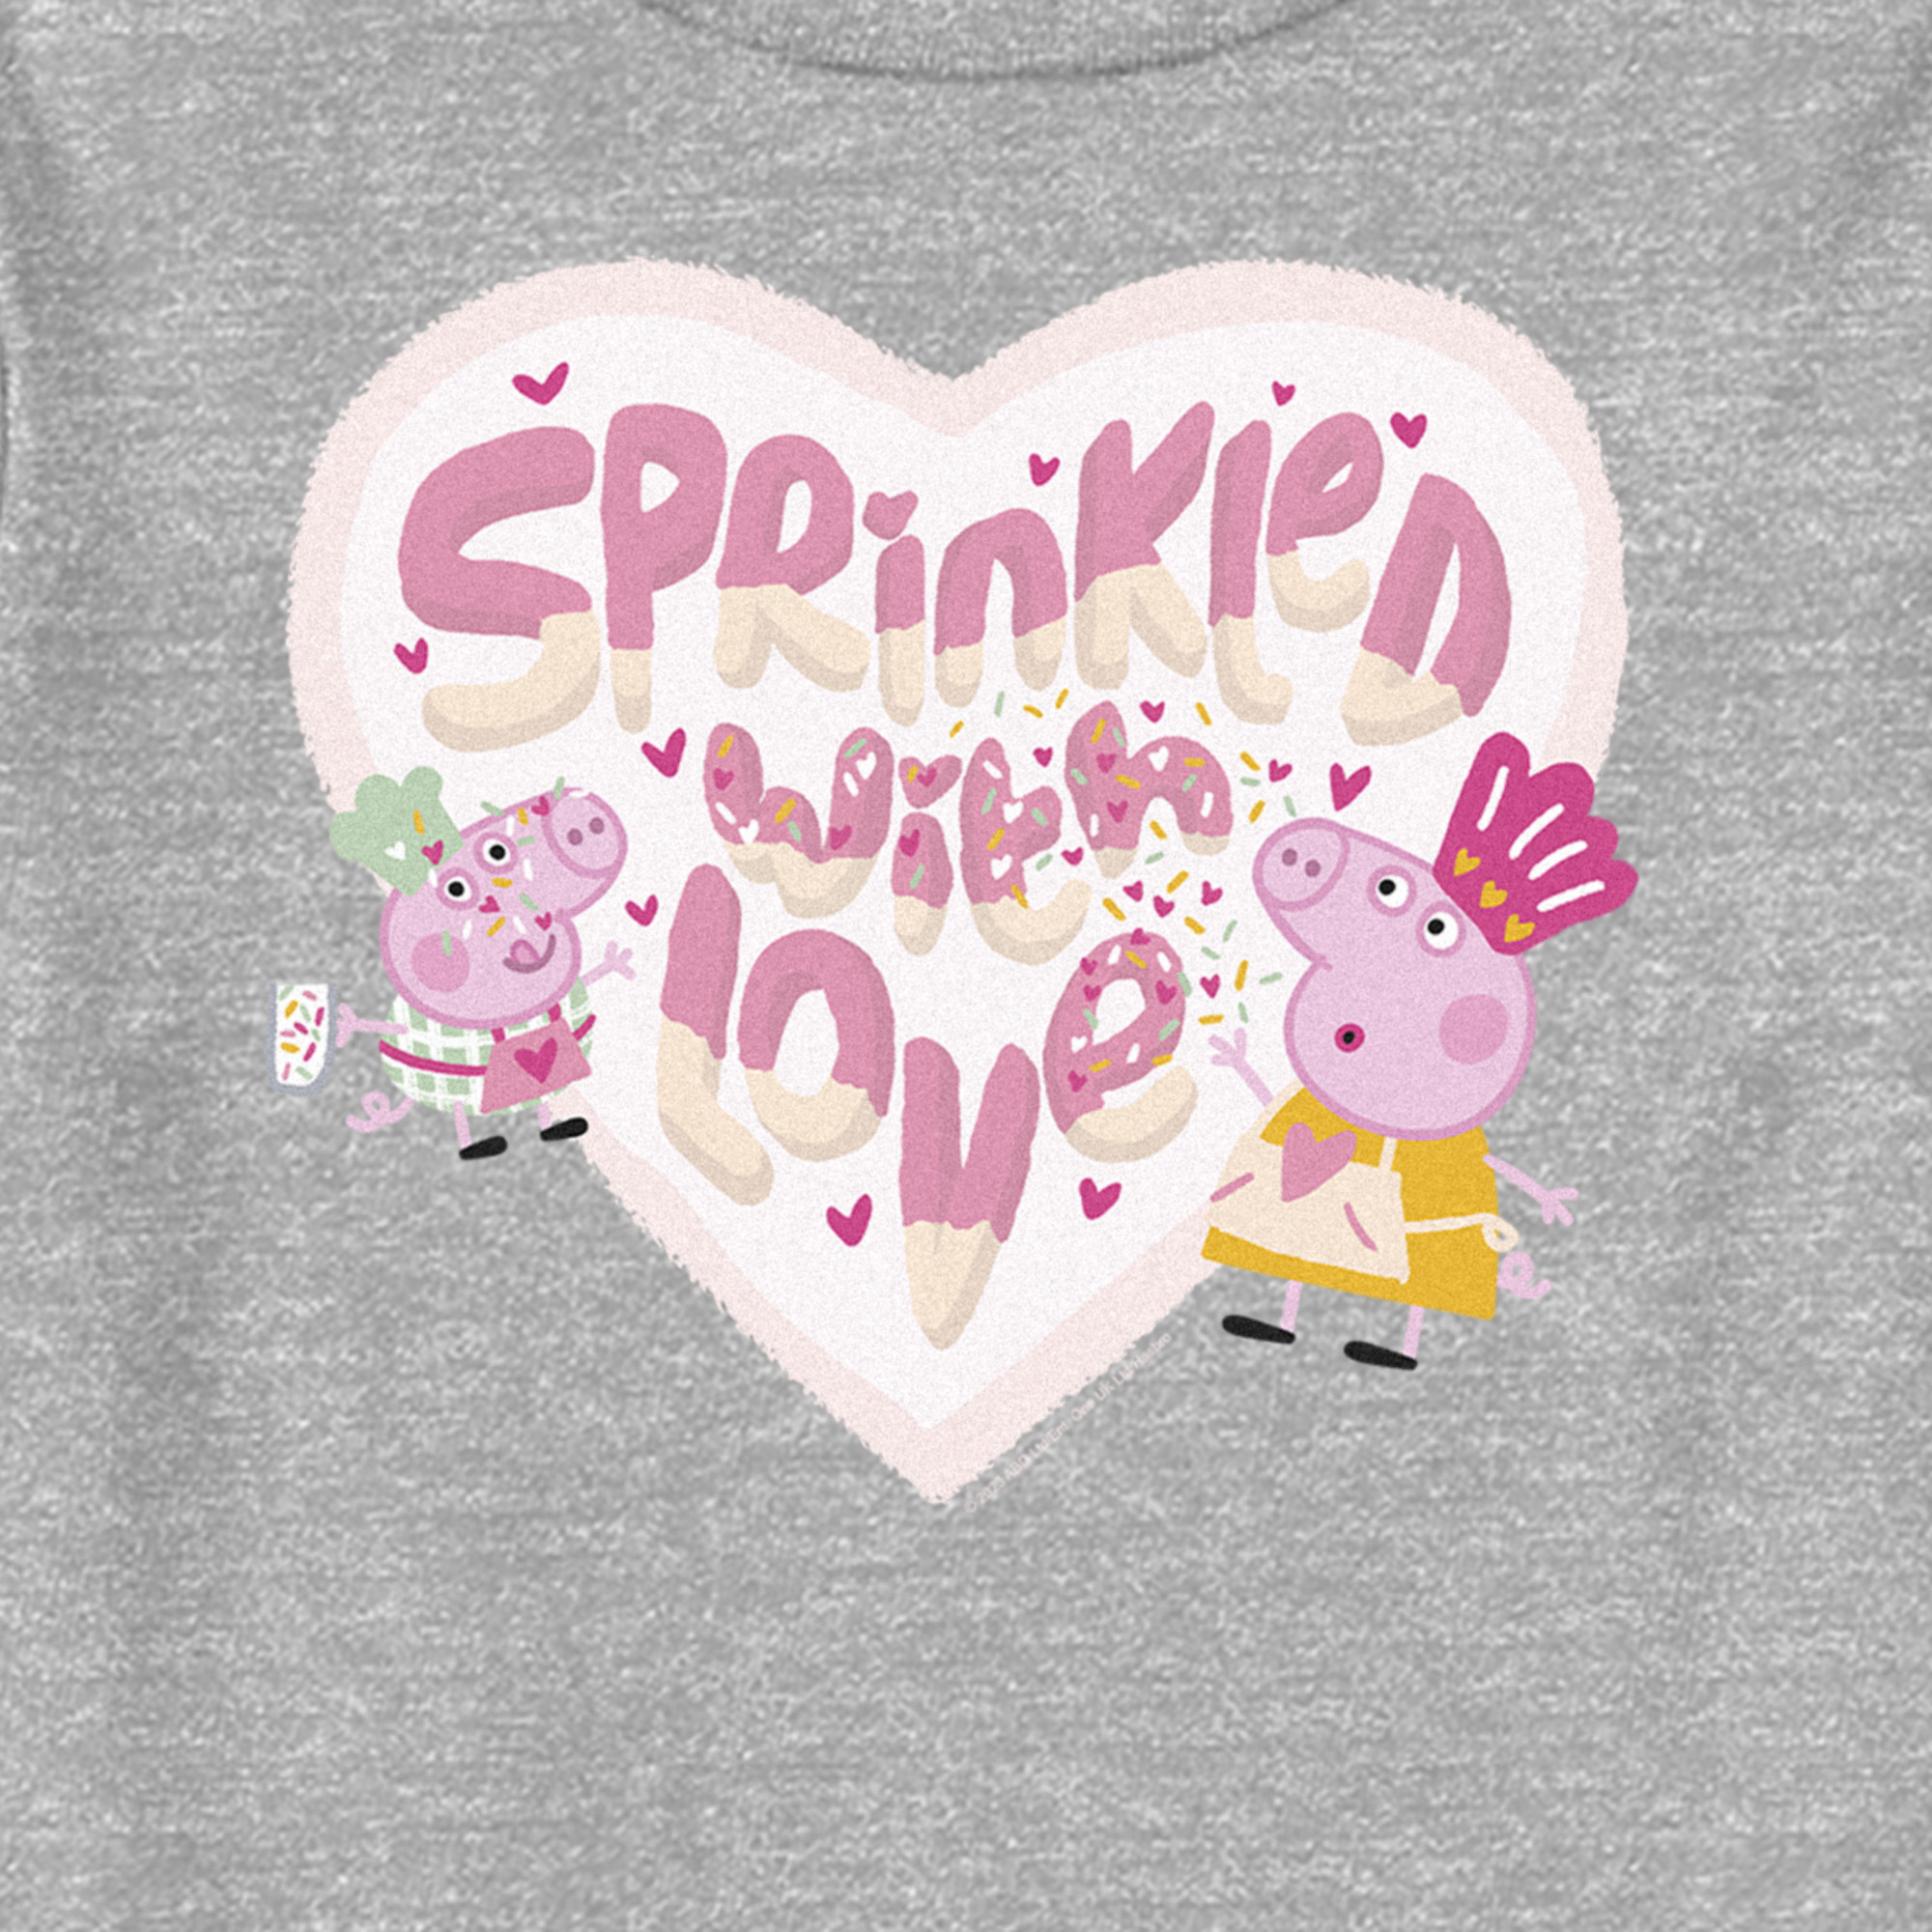 Nickelodeon Toddler's Peppa Pig Sprinkled With Love  Graphic T-Shirt